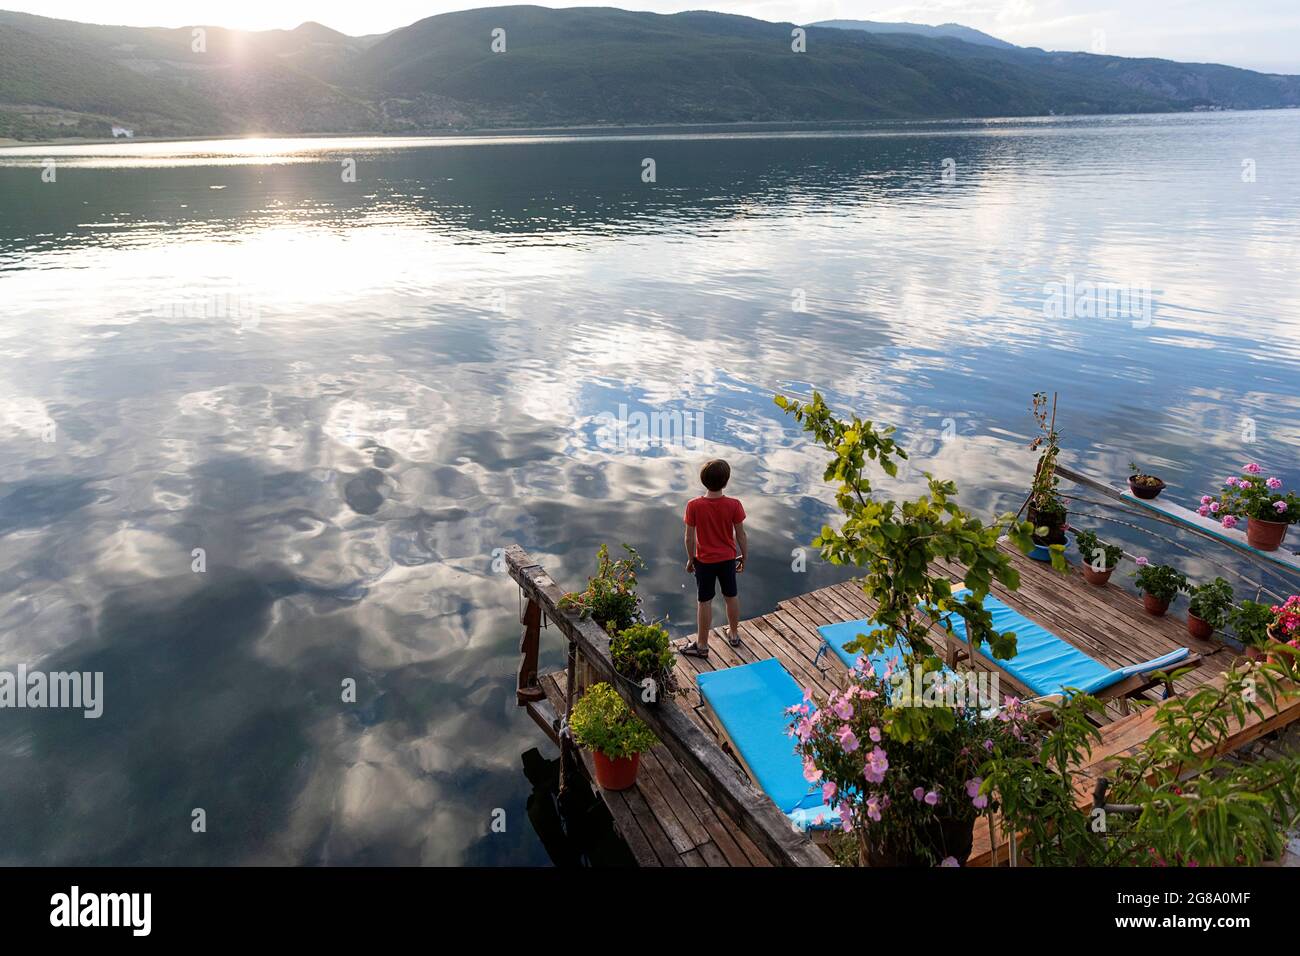 Boy standing by wooden lounge chairs at sunset on a pier on the shores of the calm lake Ohrid, Lin, Albania Stock Photo